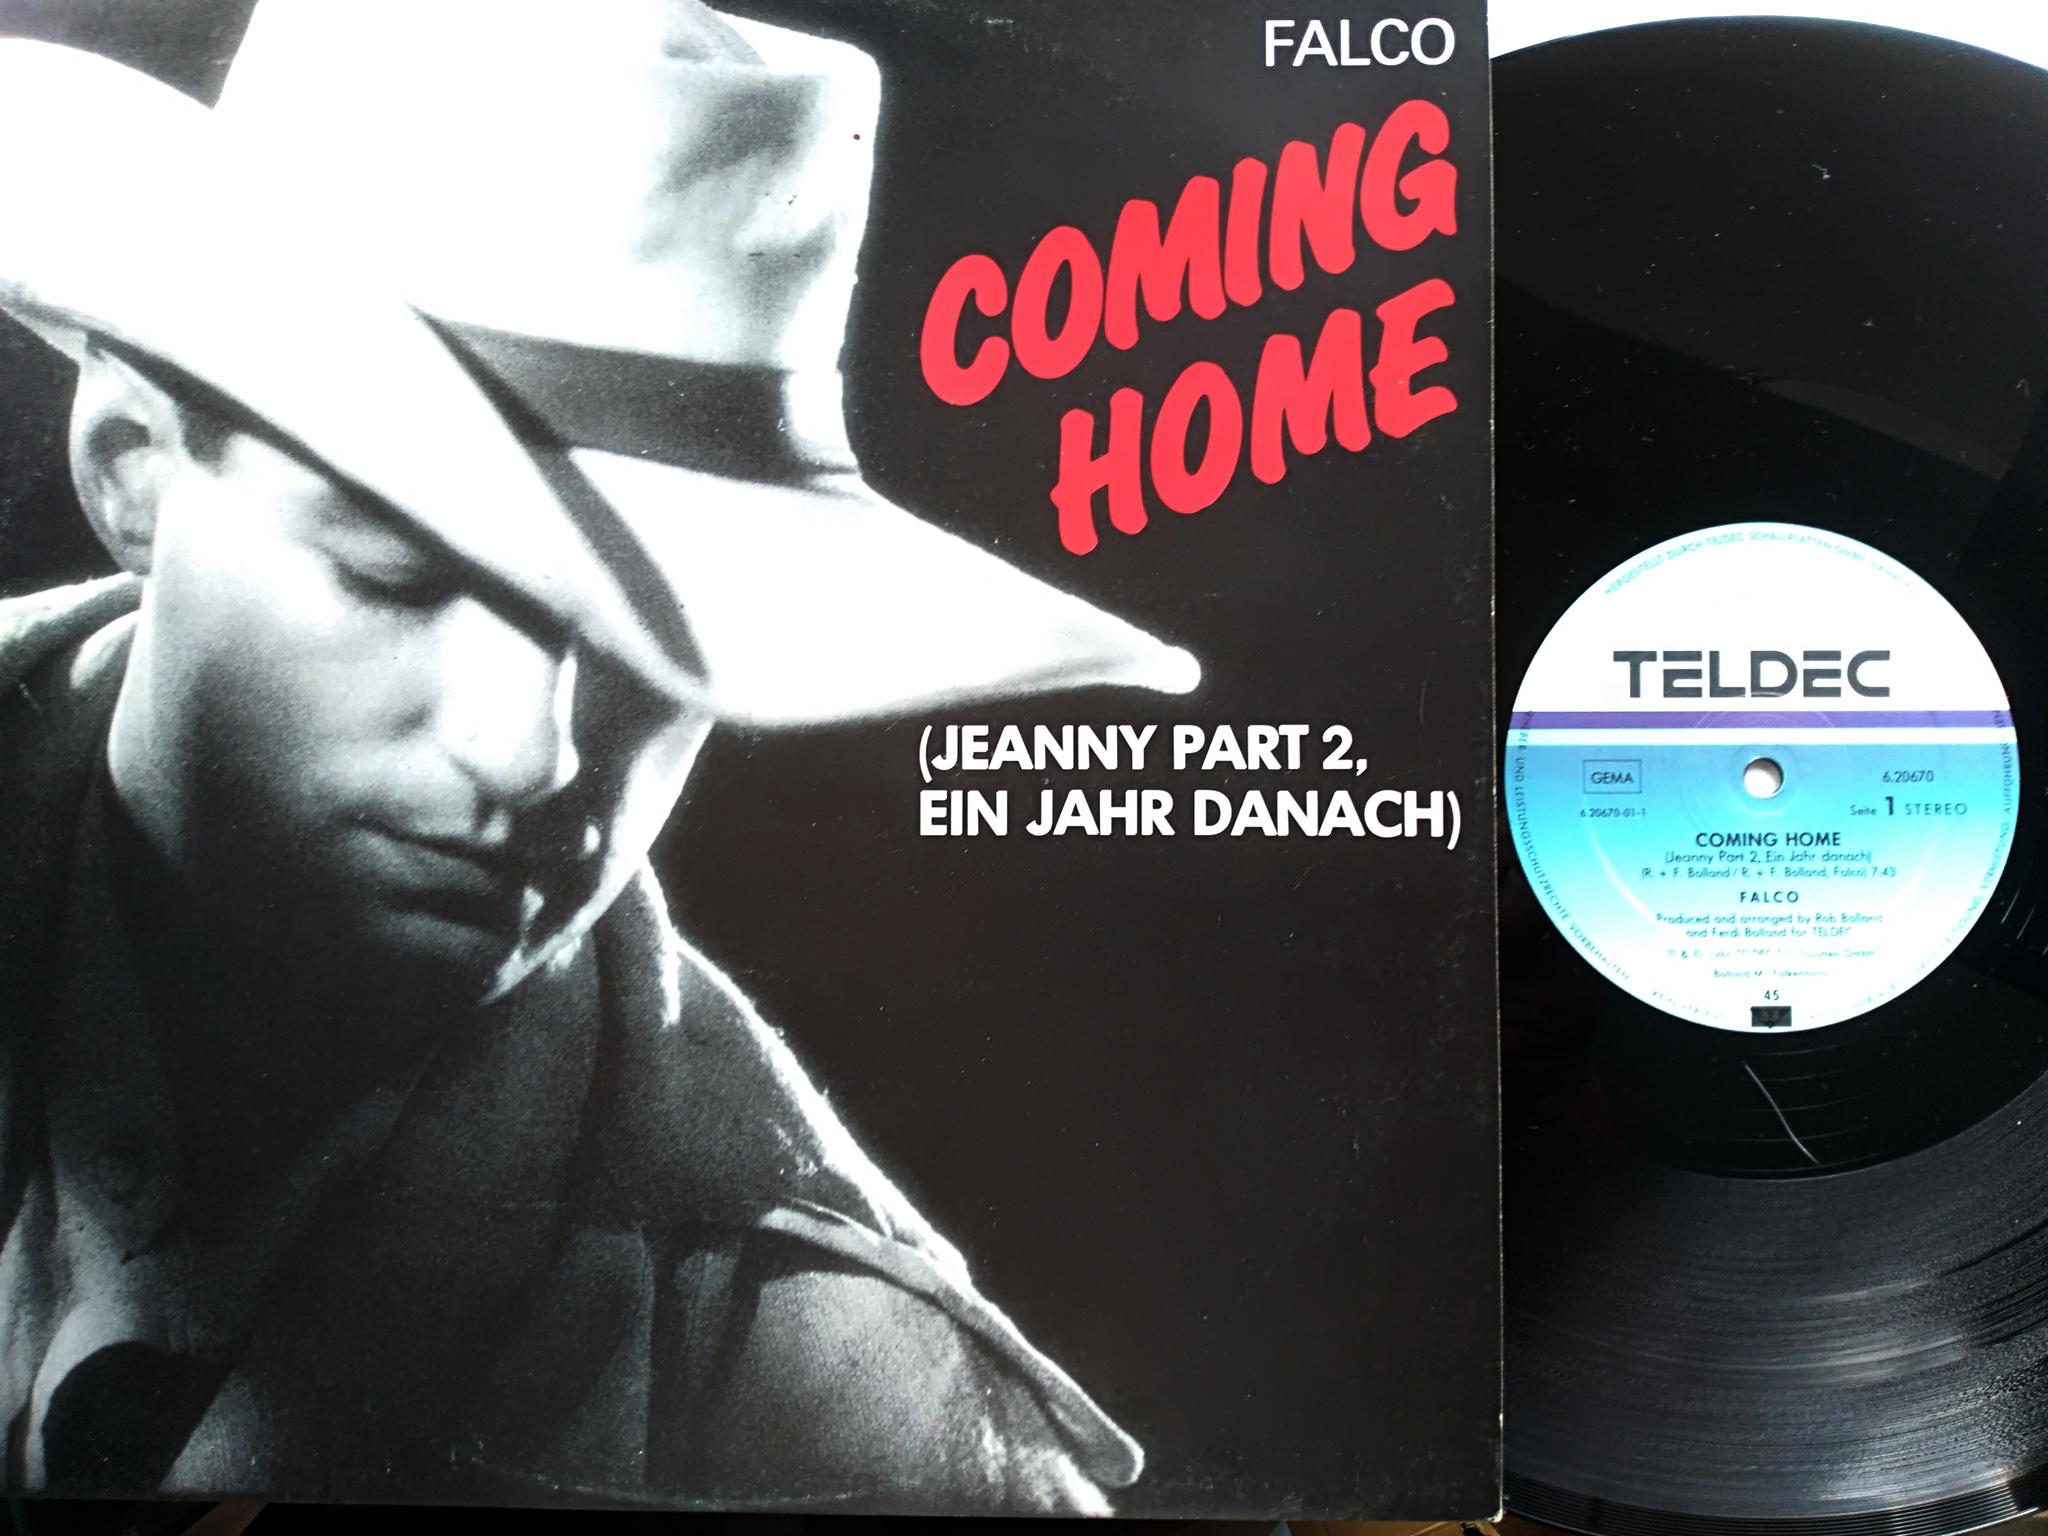 Falco - Coming Home (Jeanny Part 2)